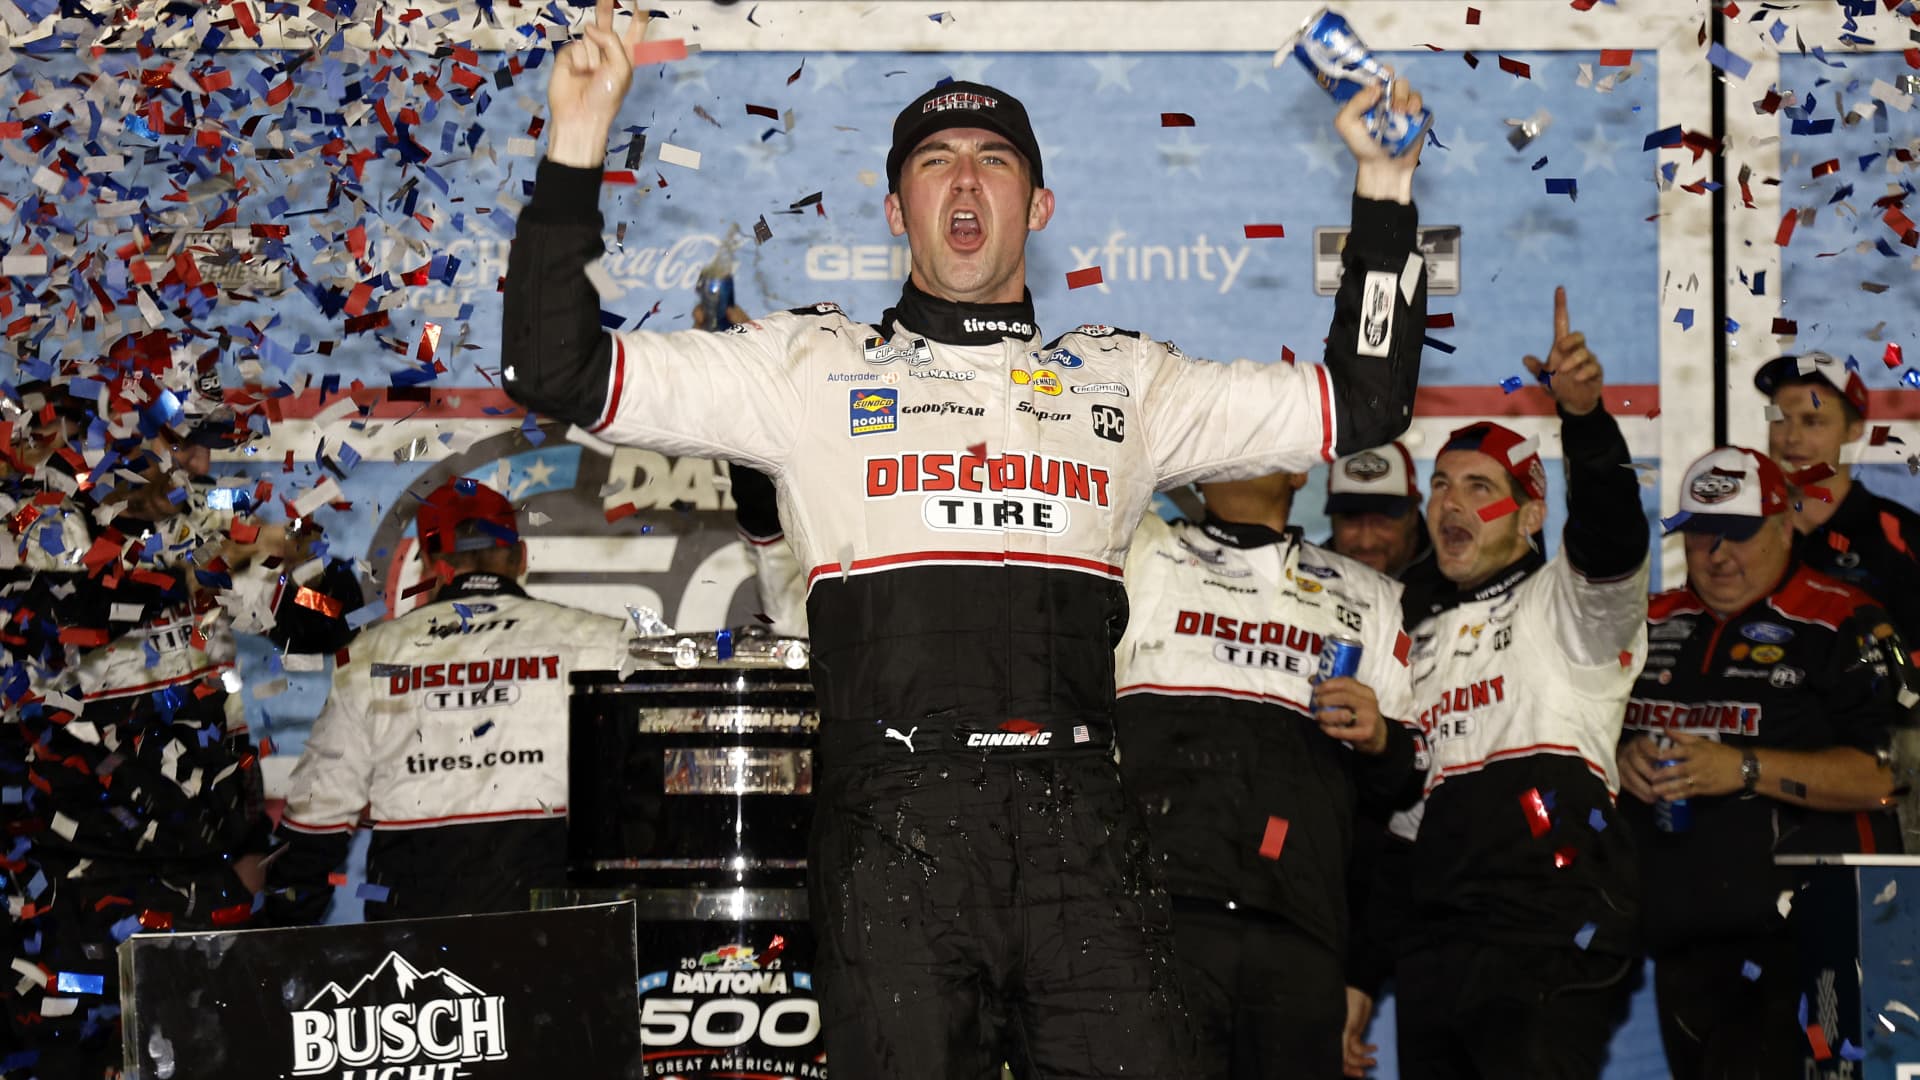 Austin Cindric, driver of the #2 Discount Tire Ford, celebrates in the Ruoff Mortgage victory lane after winning the NASCAR Cup Series 64th Annual Daytona 500 at Daytona International Speedway on February 20, 2022 in Daytona Beach, Florida.